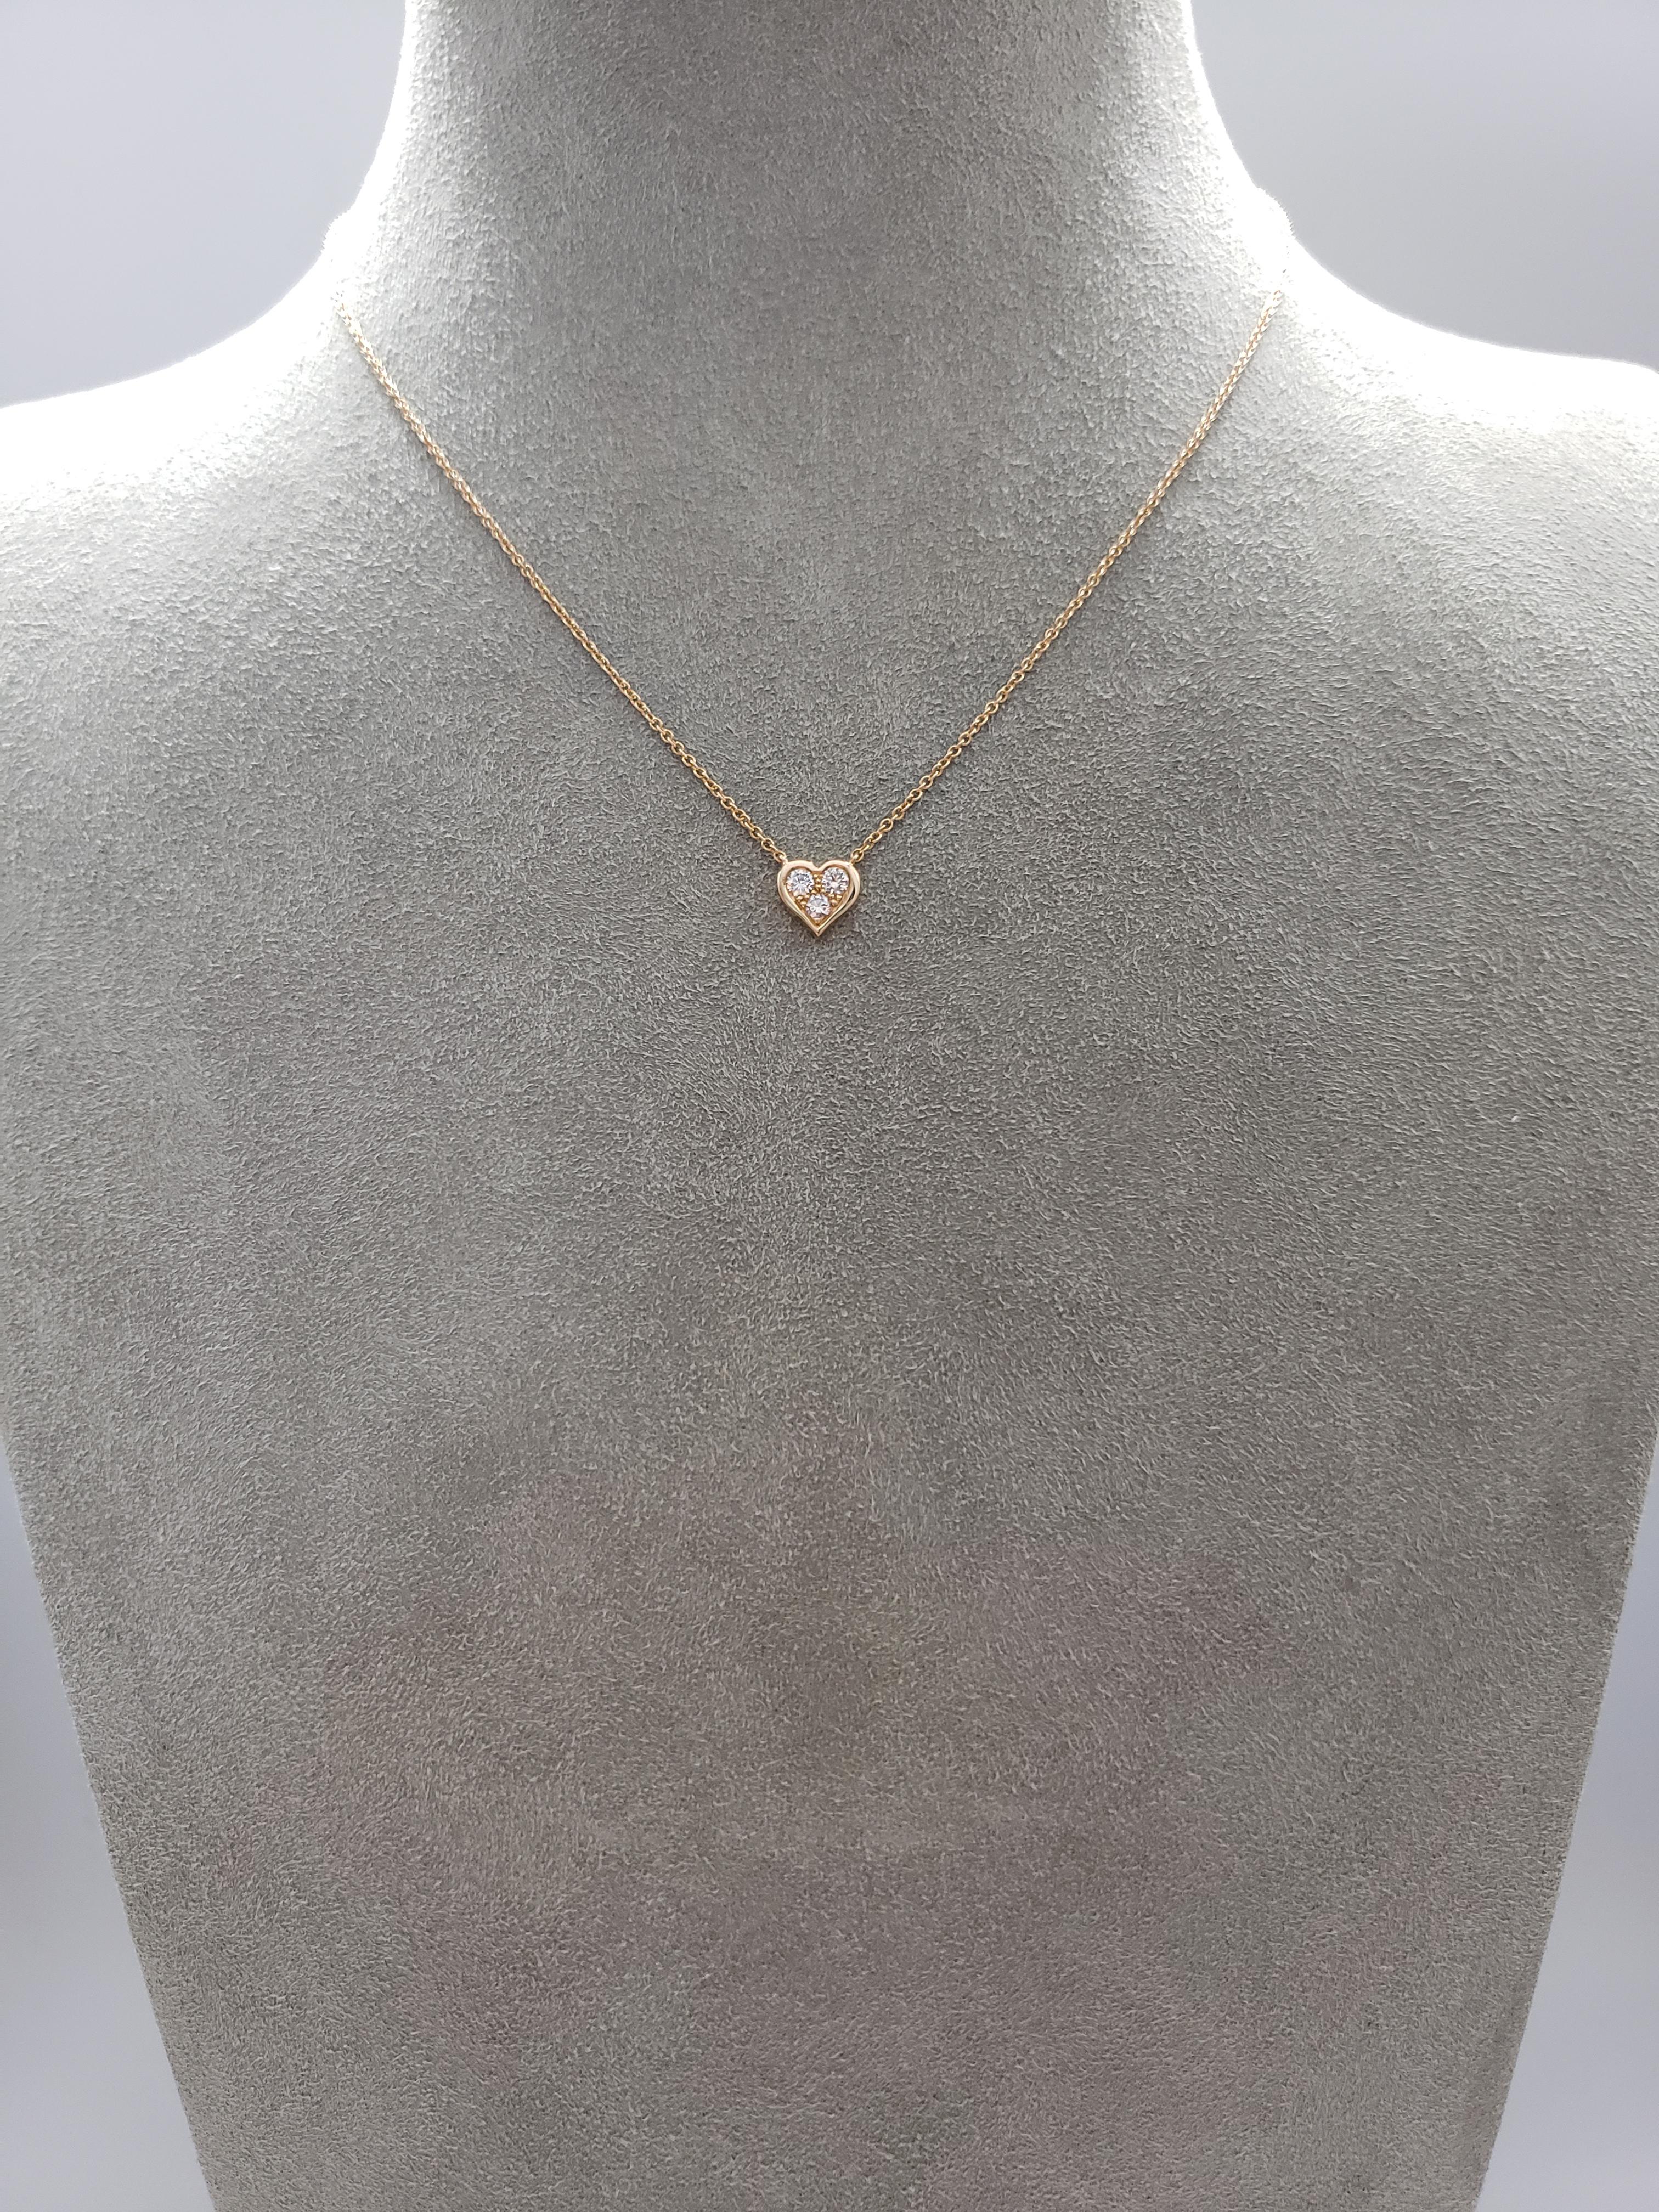 Made and signed by Tiffany & Co., features an 18 karat rose gold heart pendant set with 3 round brilliant diamonds weighing 0.17 carats total. Suspended on an 18 inch rose gold chain.